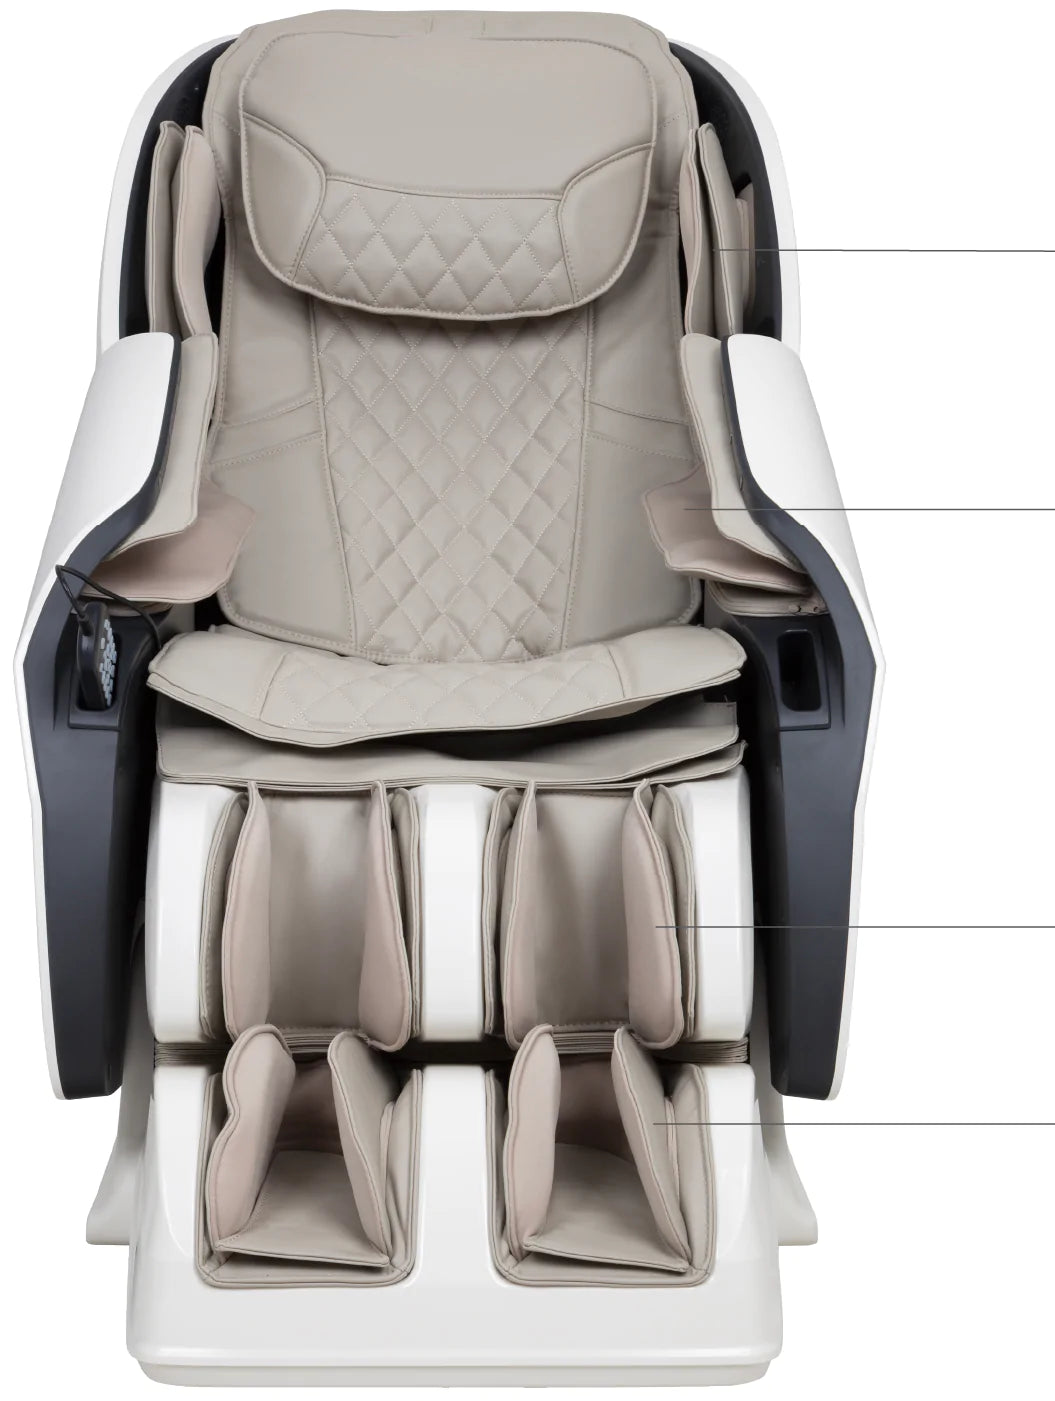 The Osaki Vista Massage Chair has 32 individual air cells strategically positioned throughout the entire chair. 